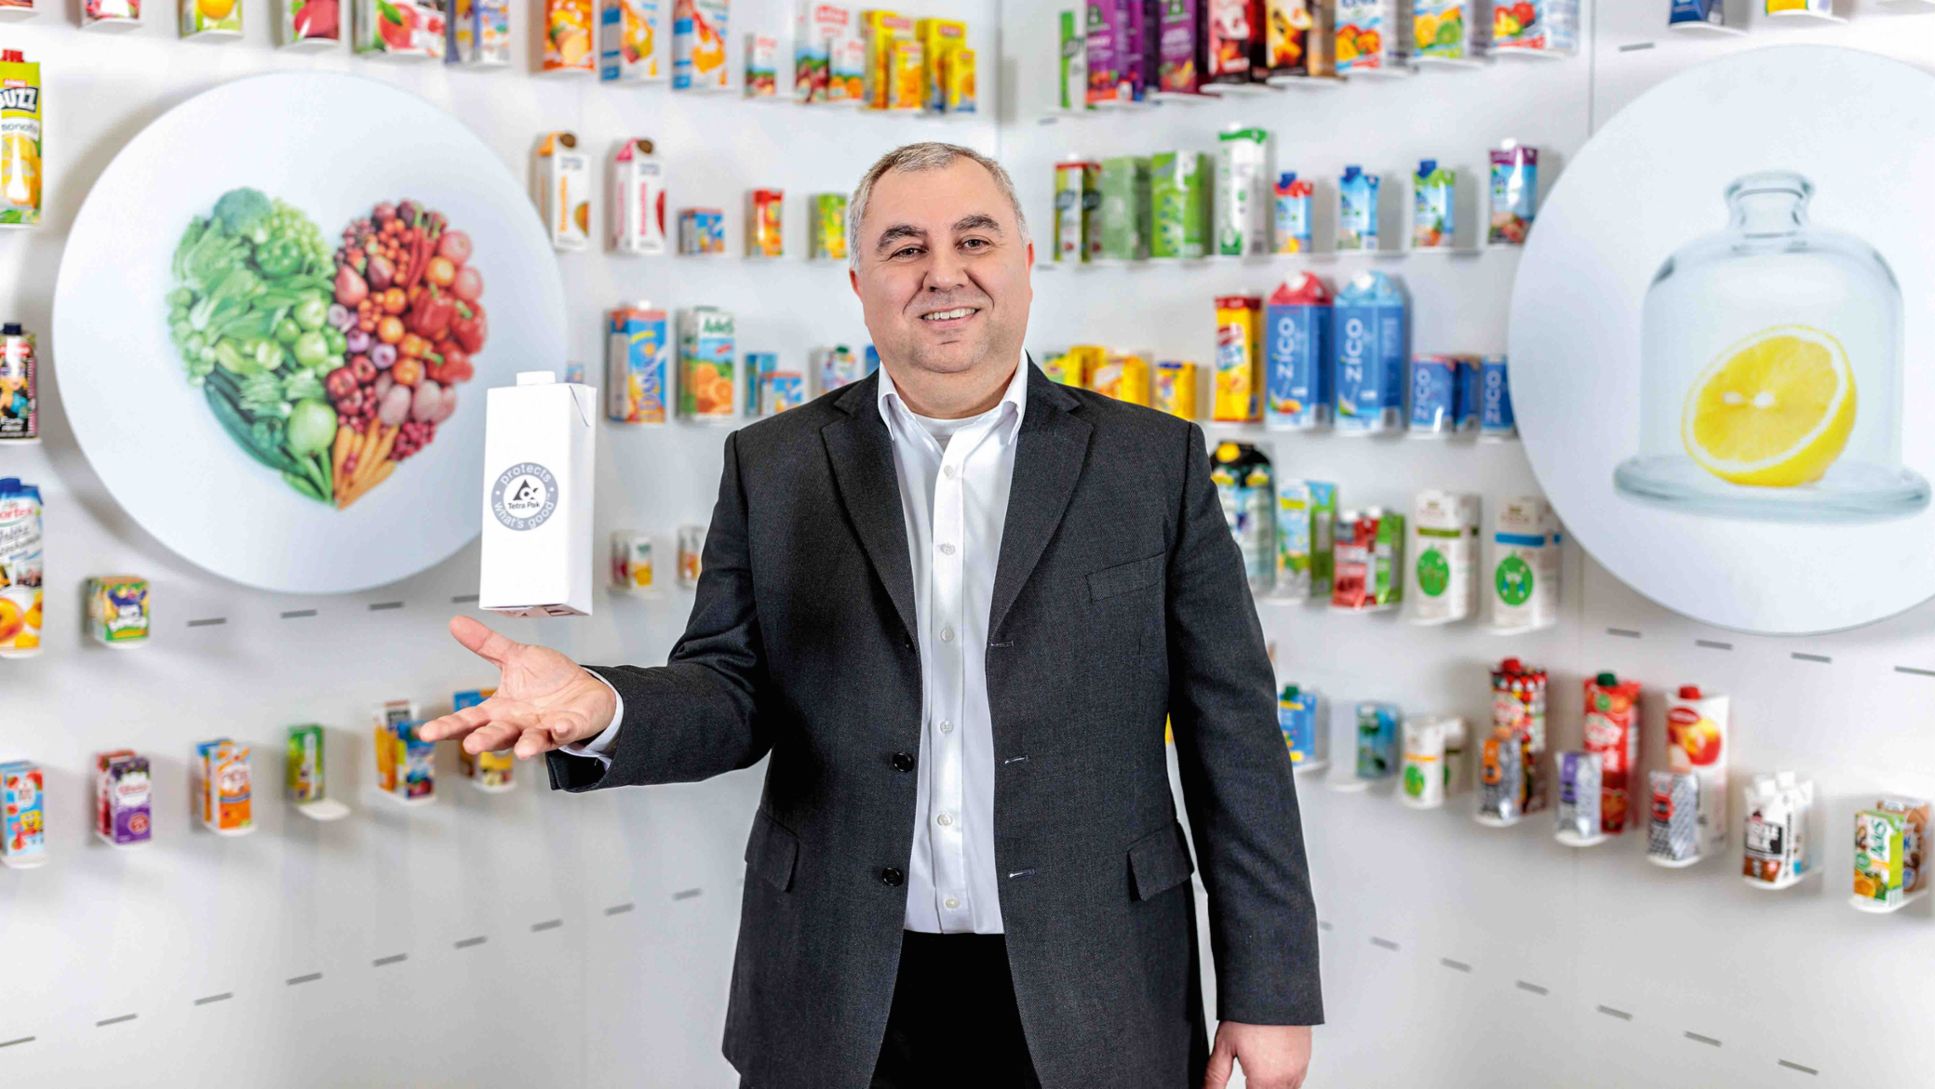 Roberto Franchitti, Vice President of Research and Development for the Carton Value & Economy division of the Tetra Pak Group, 2018, Porsche Consulting GmbH